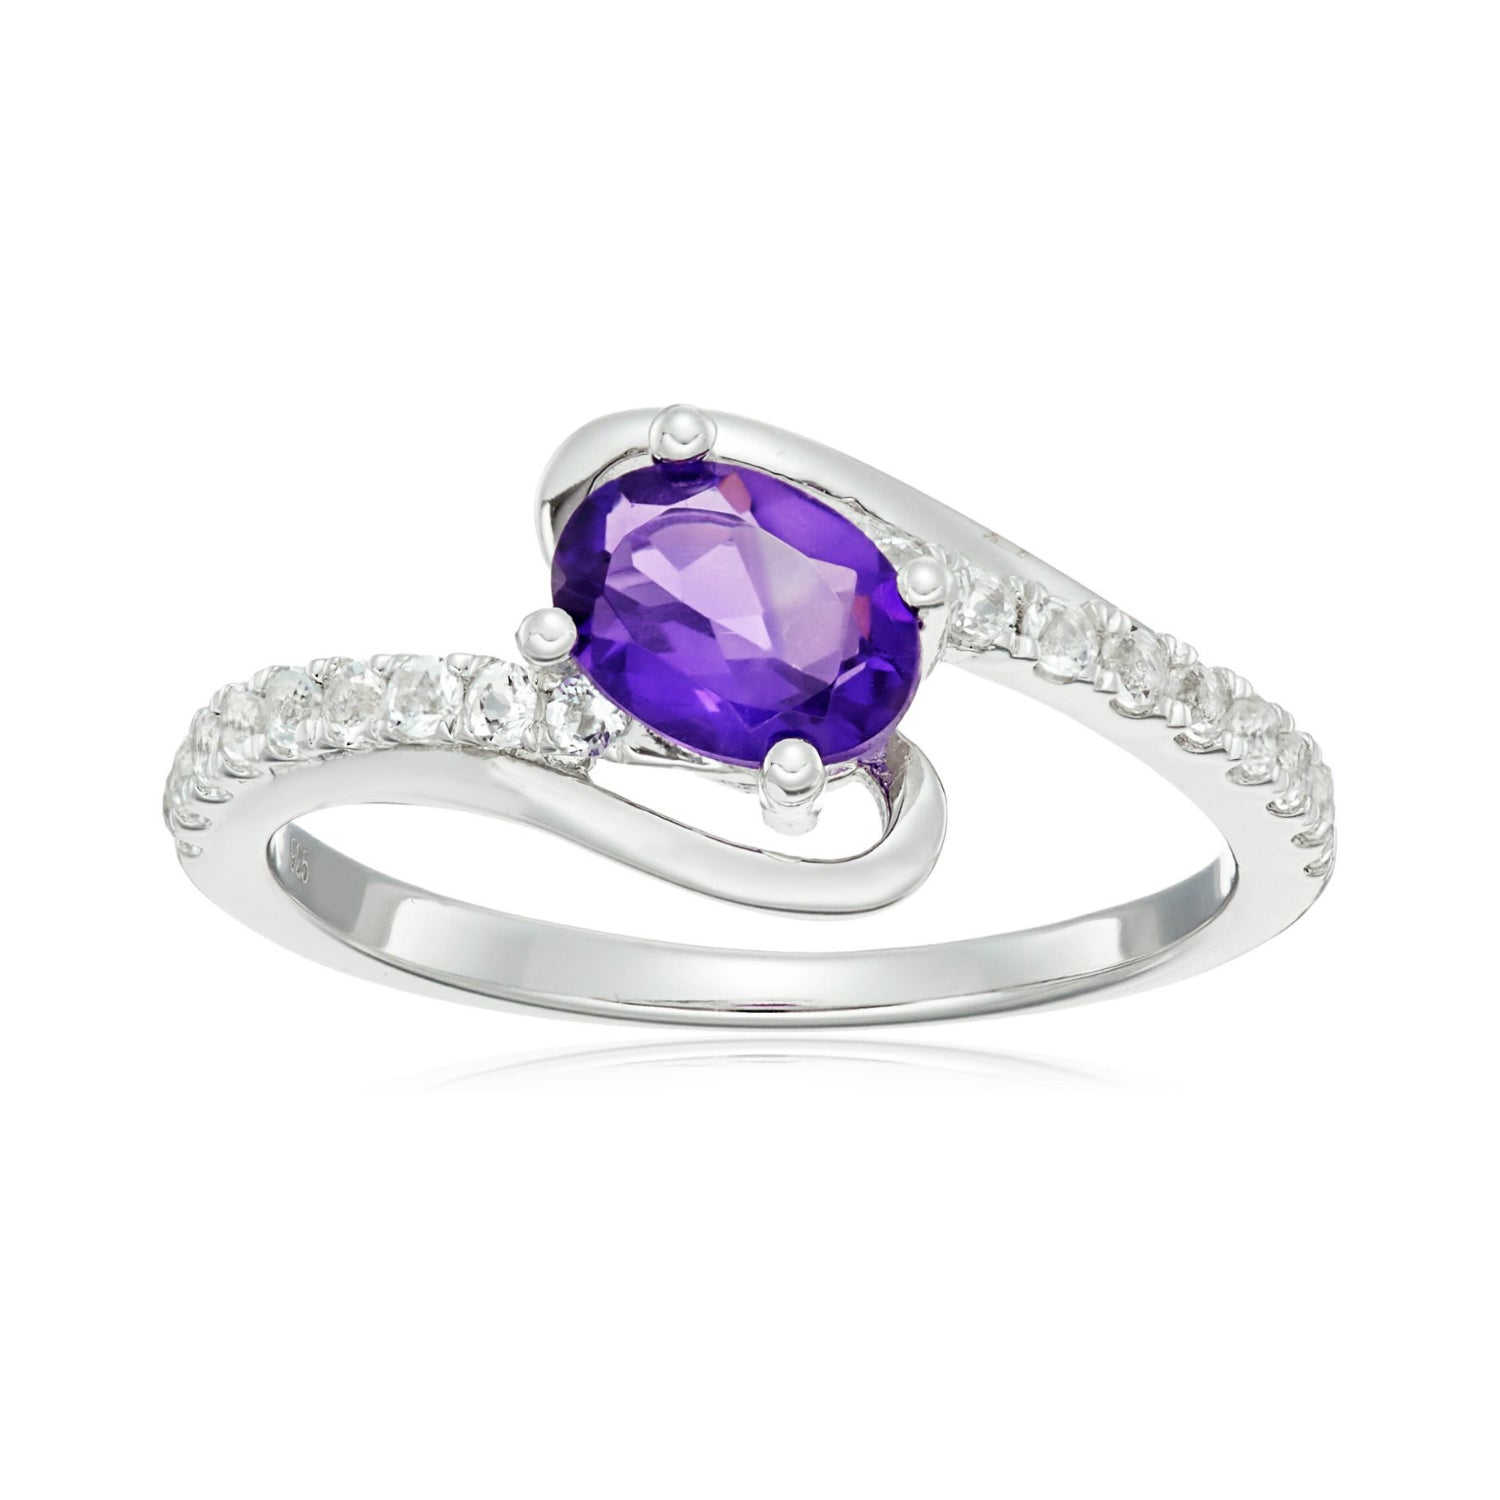 Pinctore Sterling Silver African Amethyst and White Topaz Ring - pinctore